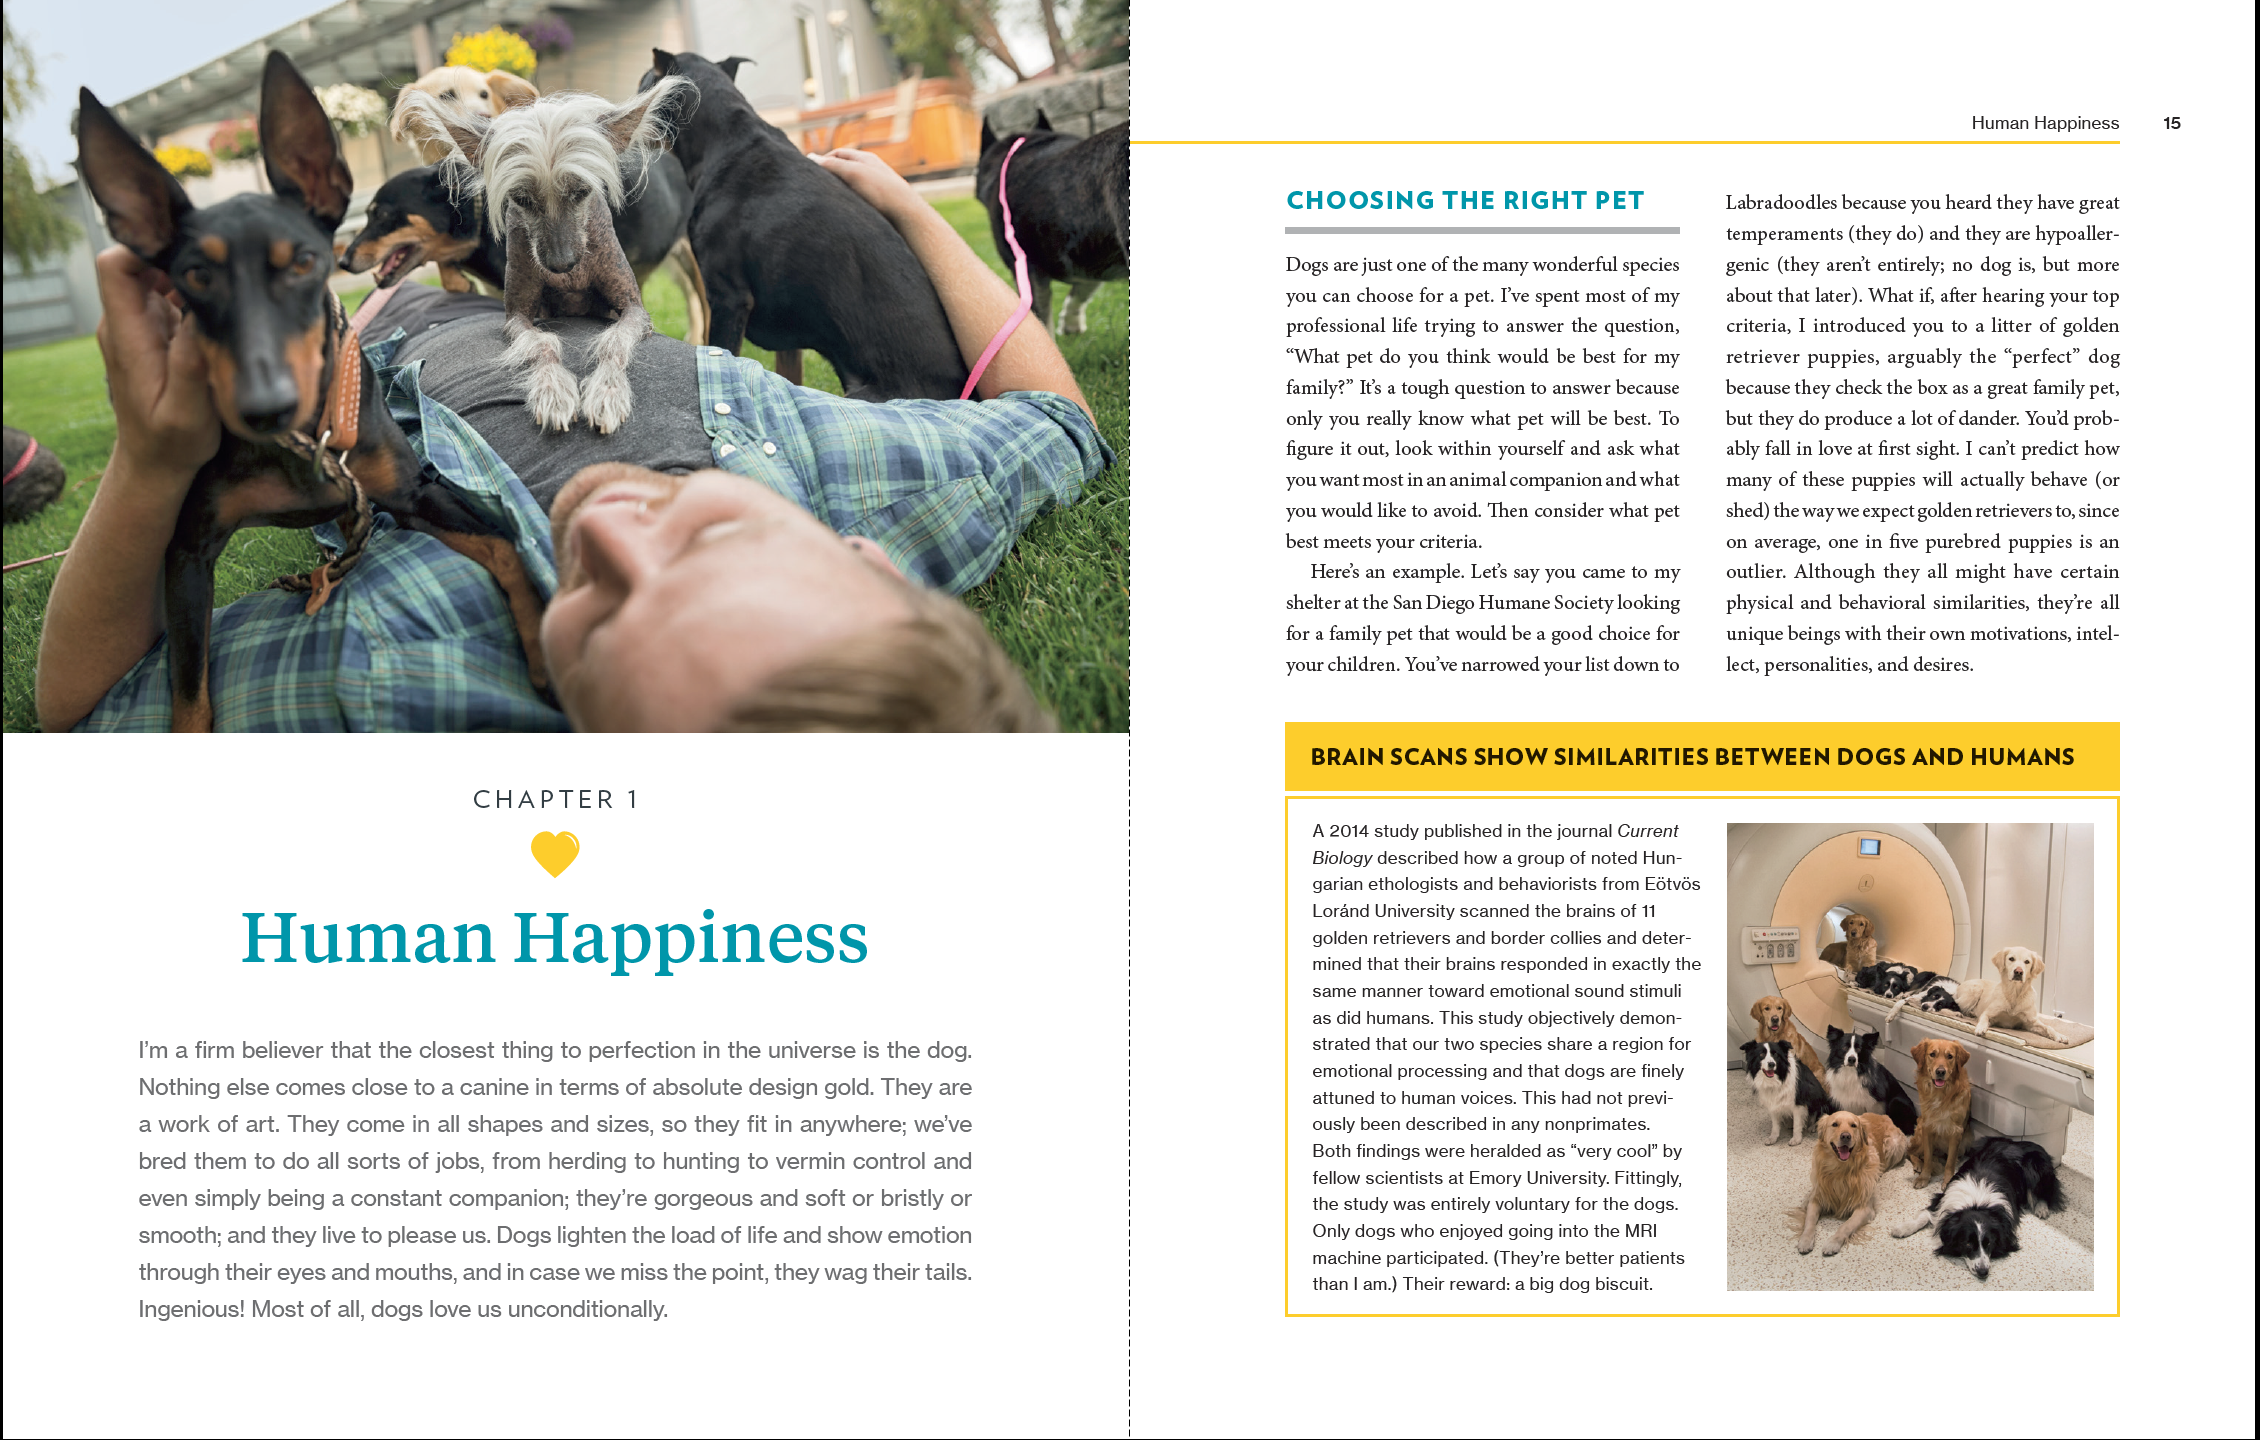 Complete Guide to Pet Health, Behavior, and Happiness, National Geographic, 2018